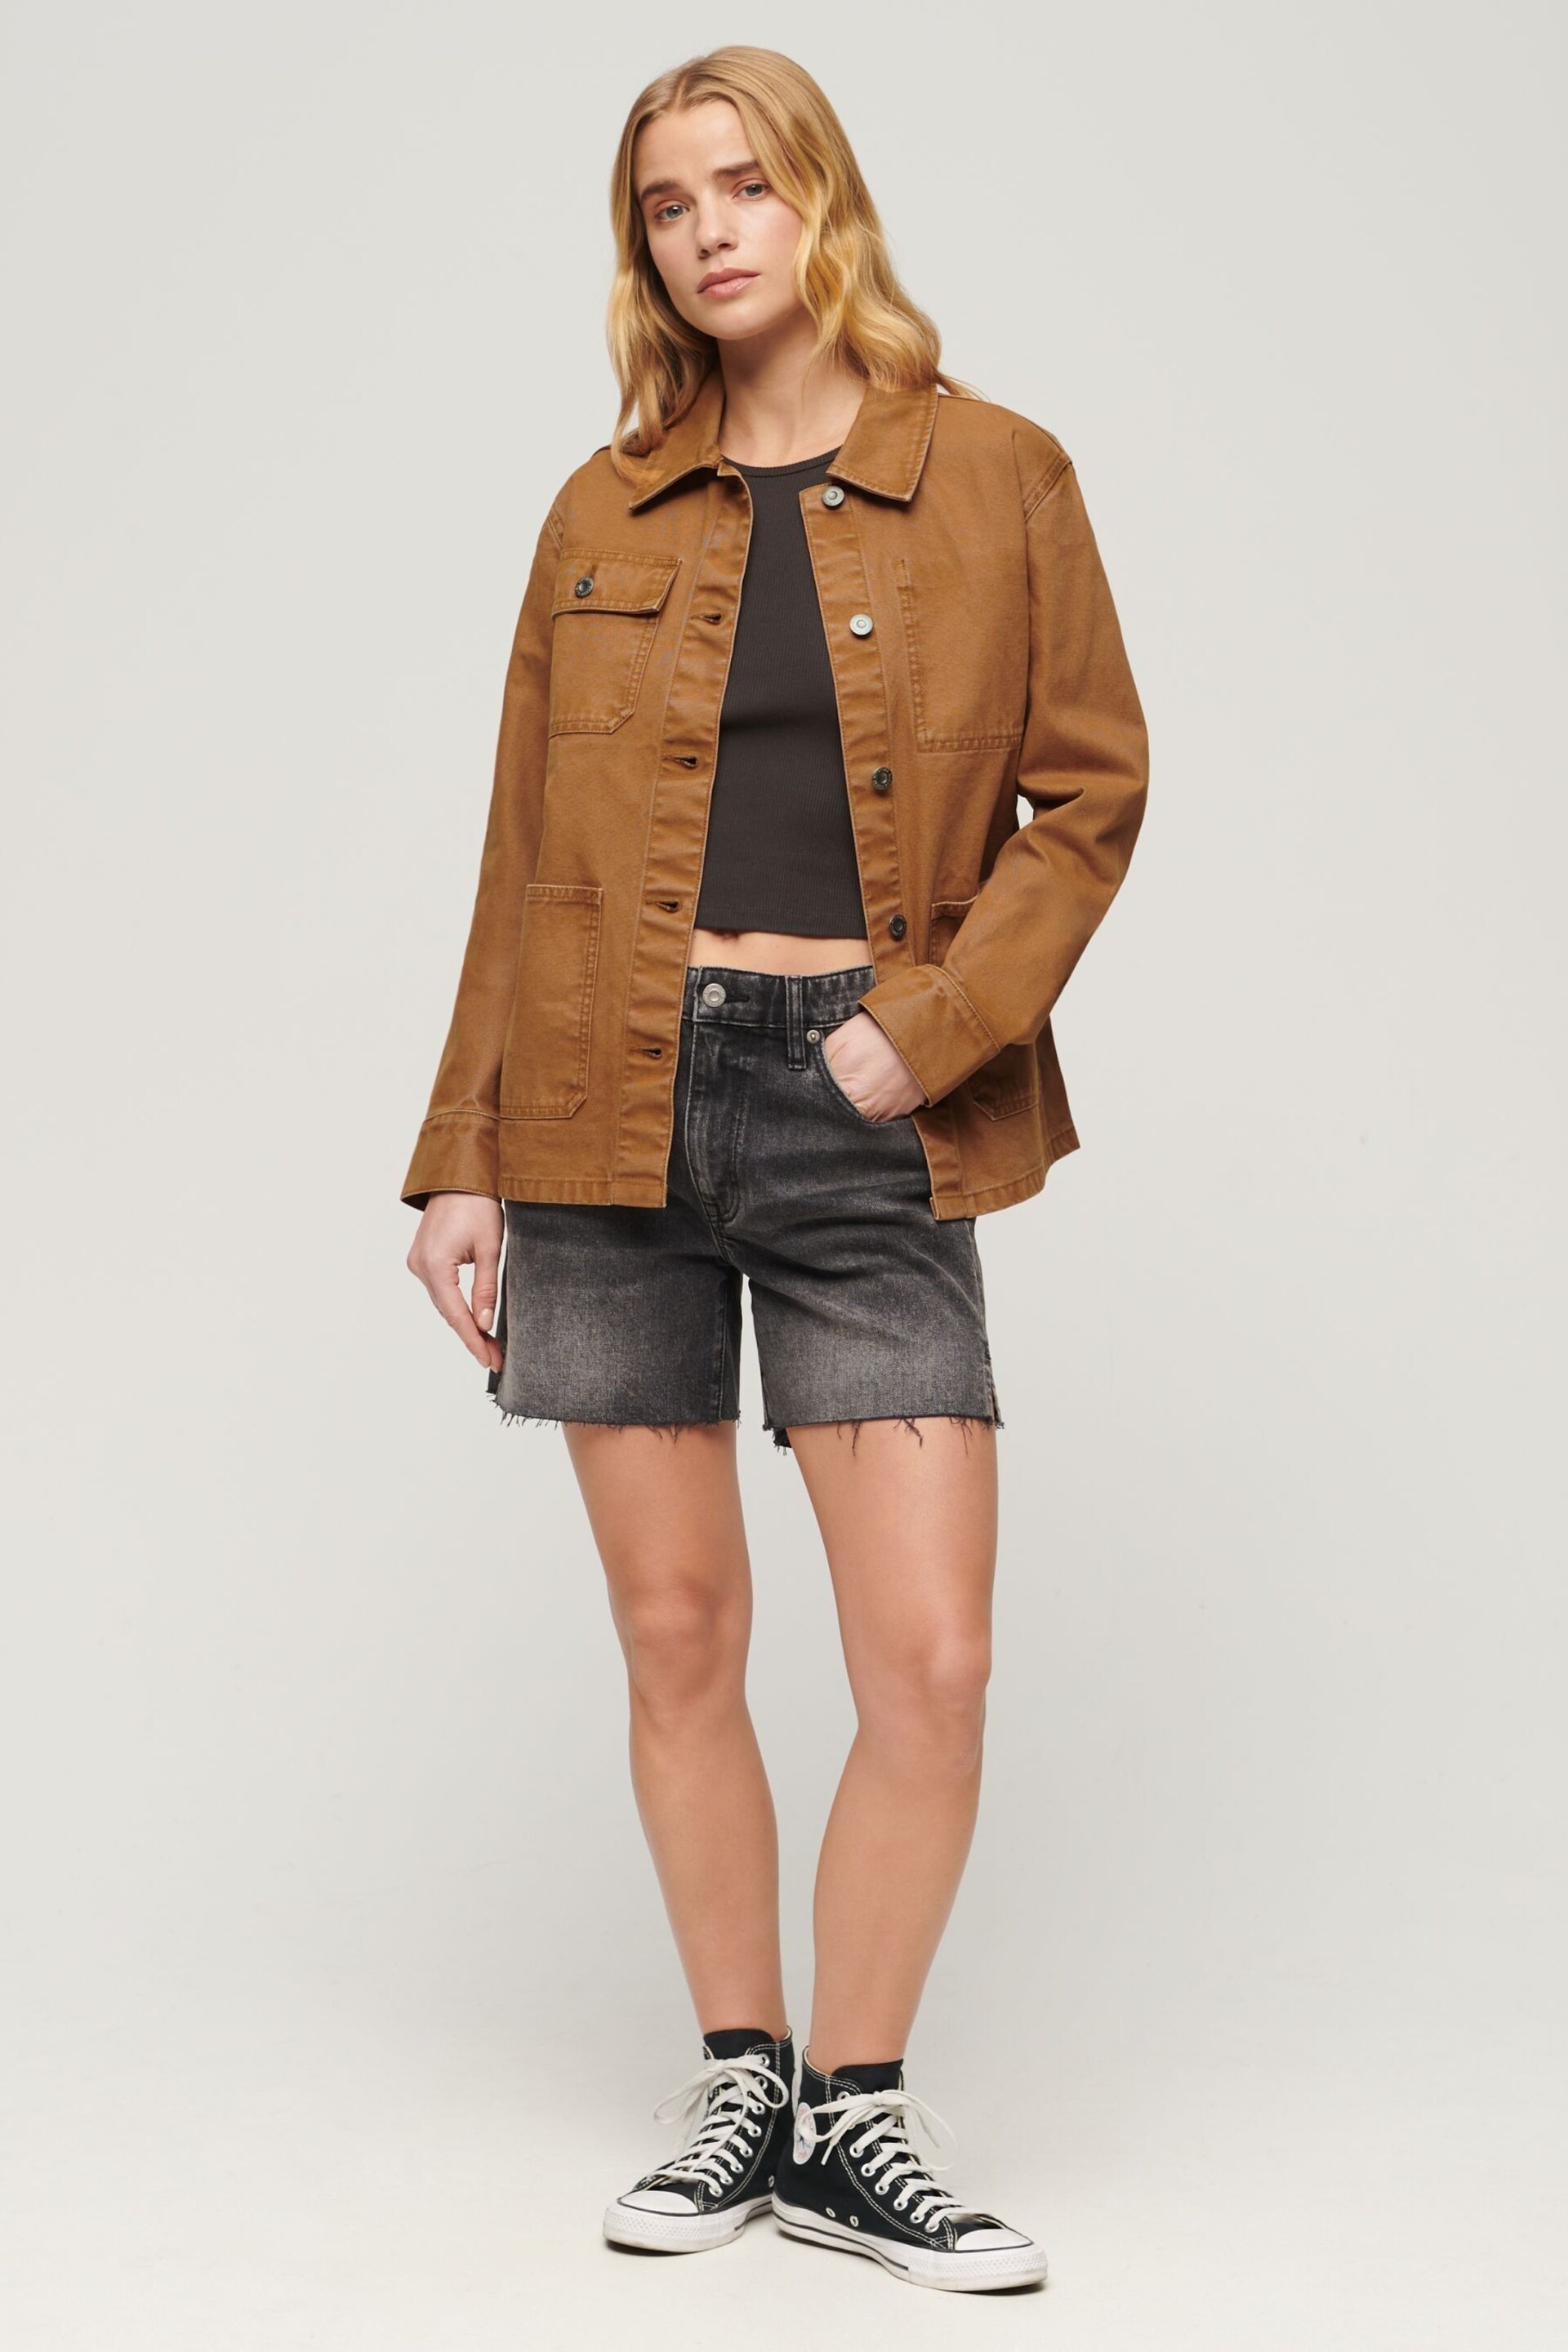 SUPERDRY Brown SUPERDRY Canvas Chore Jacket - Image 2 of 6